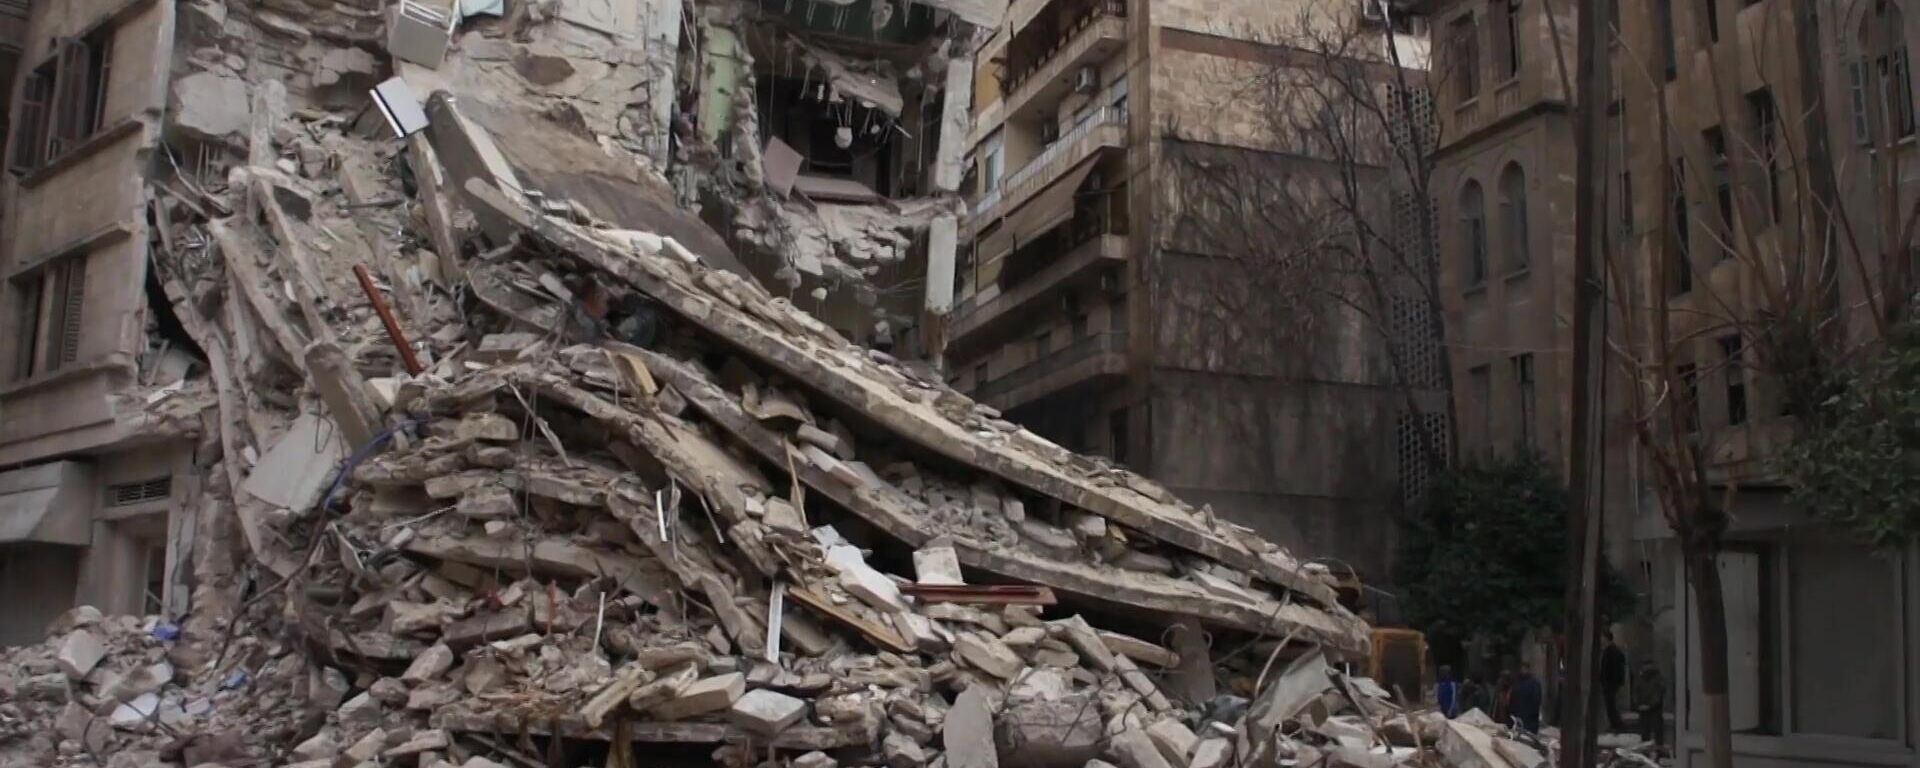 A residential building destroyed by a magnitude 7.8 earthquake that occurred on February 6 is seen in Aleppo, Syria - Sputnik International, 1920, 14.02.2023